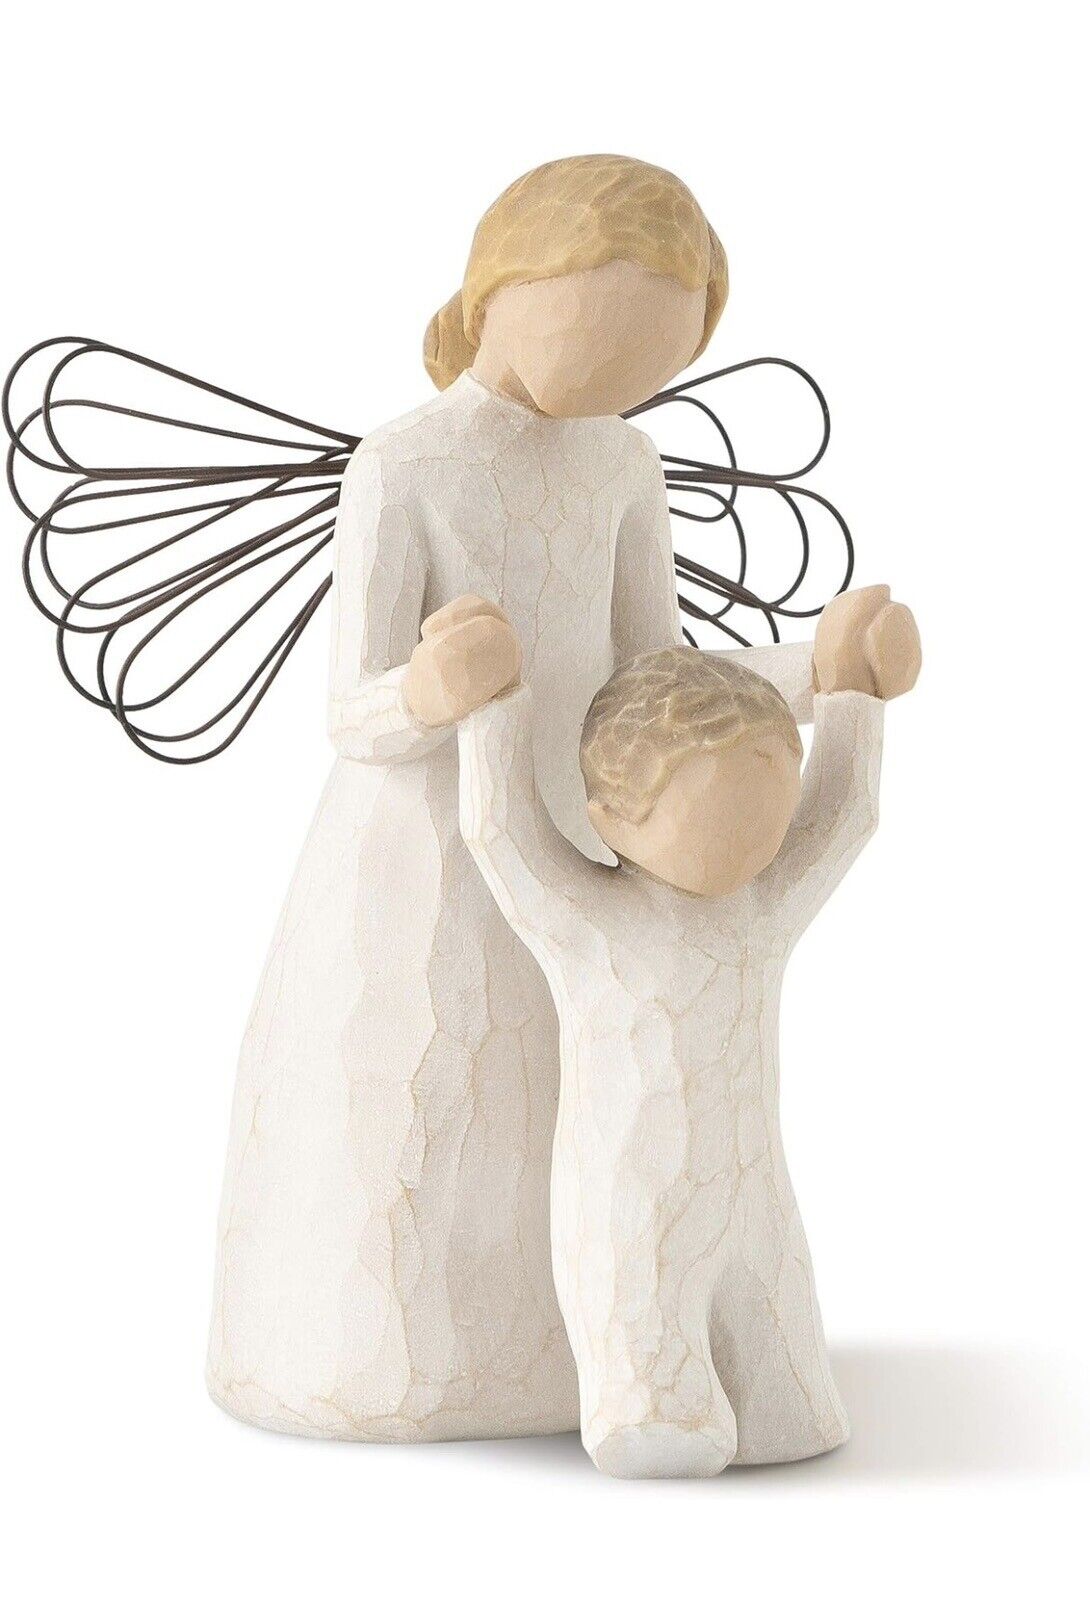 Willow Tree Guardian Angel, Sculpted Hand-Painted Figure 26034 New In Box